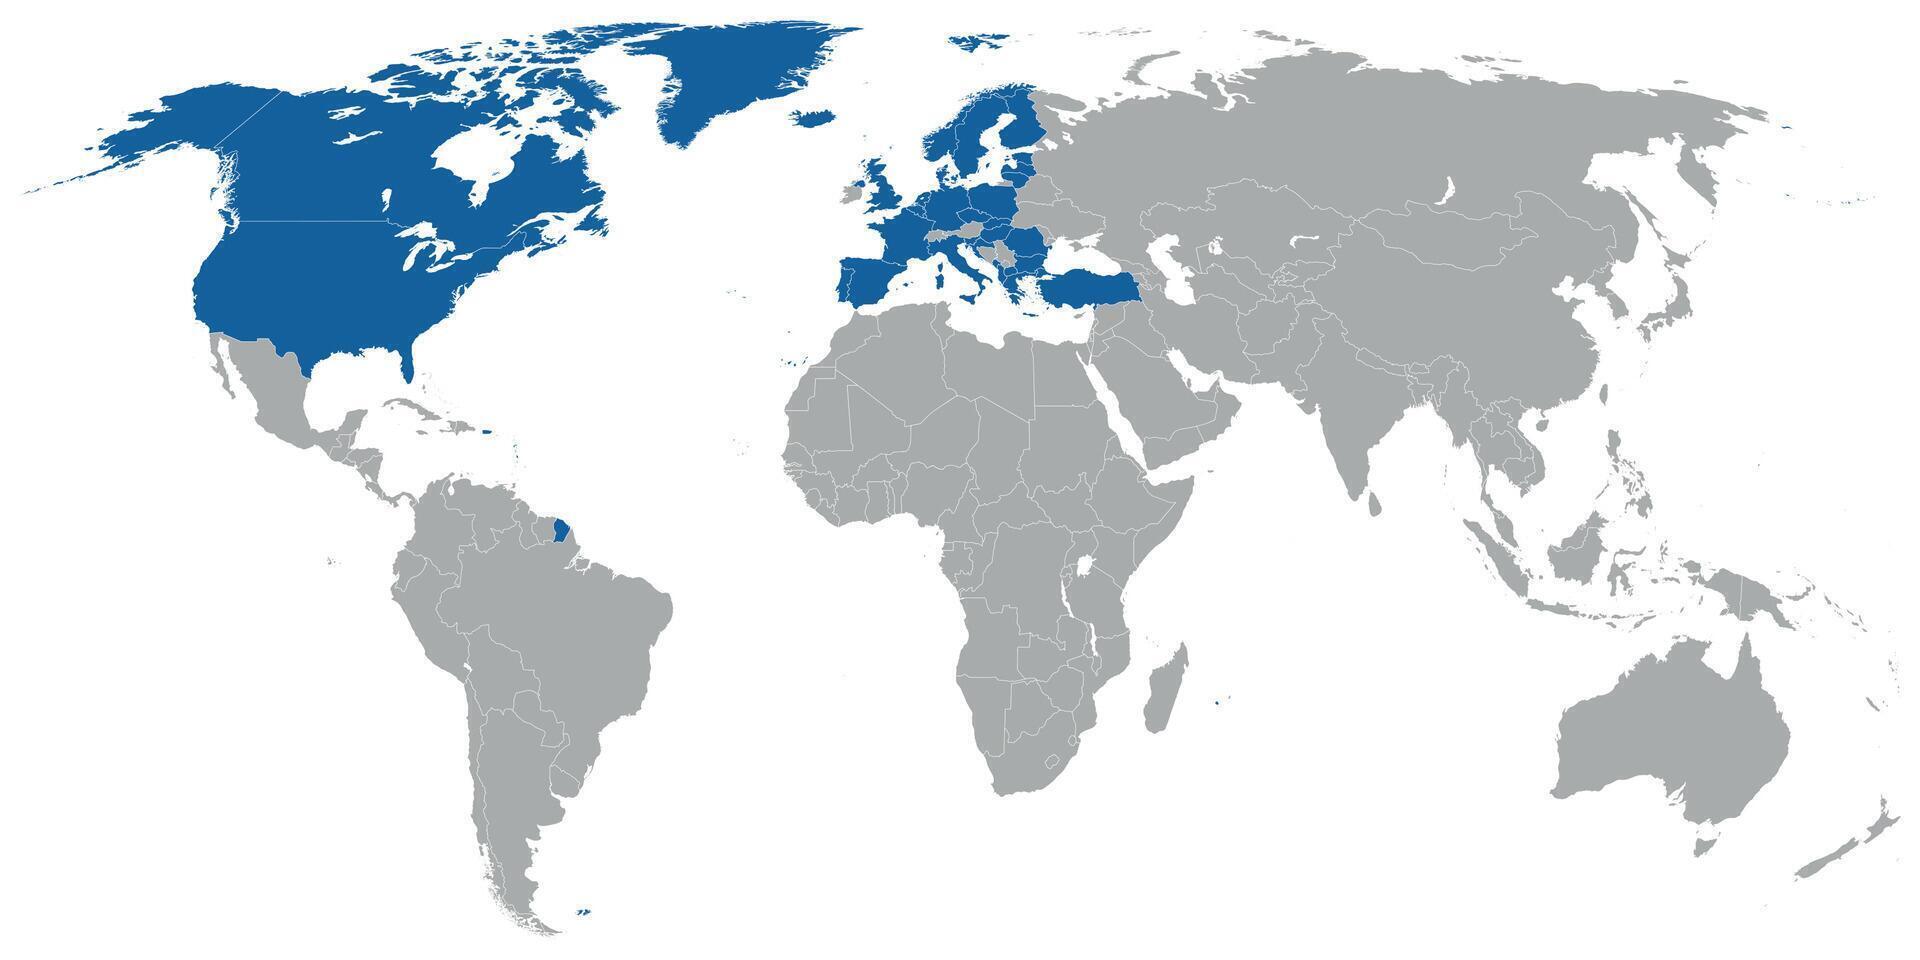 North Atlantic organization member states on map of the world vector